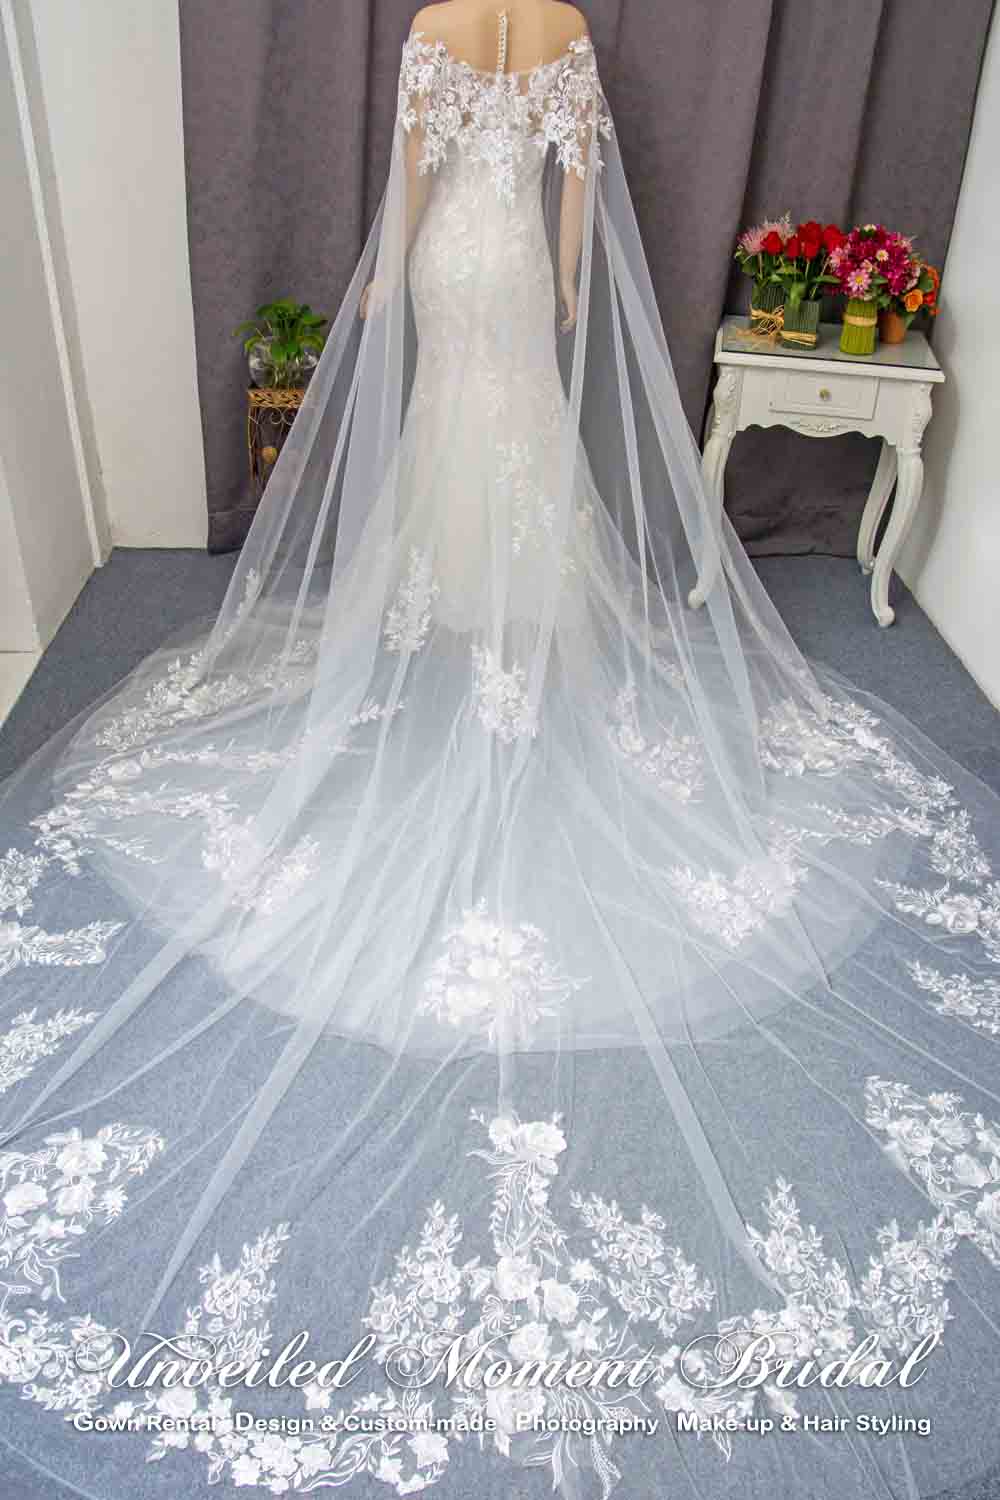 Bride in off-the-shoulder, mermaid bridal dress with sweetheart see-through round neckline, see-through low back and decorated with lace appliques cathedral train 一字膊, 心形胸, 透視薄紗圓領, 蕾絲釘珠, 透視美背, 宮廷蕾絲花邊長拖尾, 魚尾款婚紗